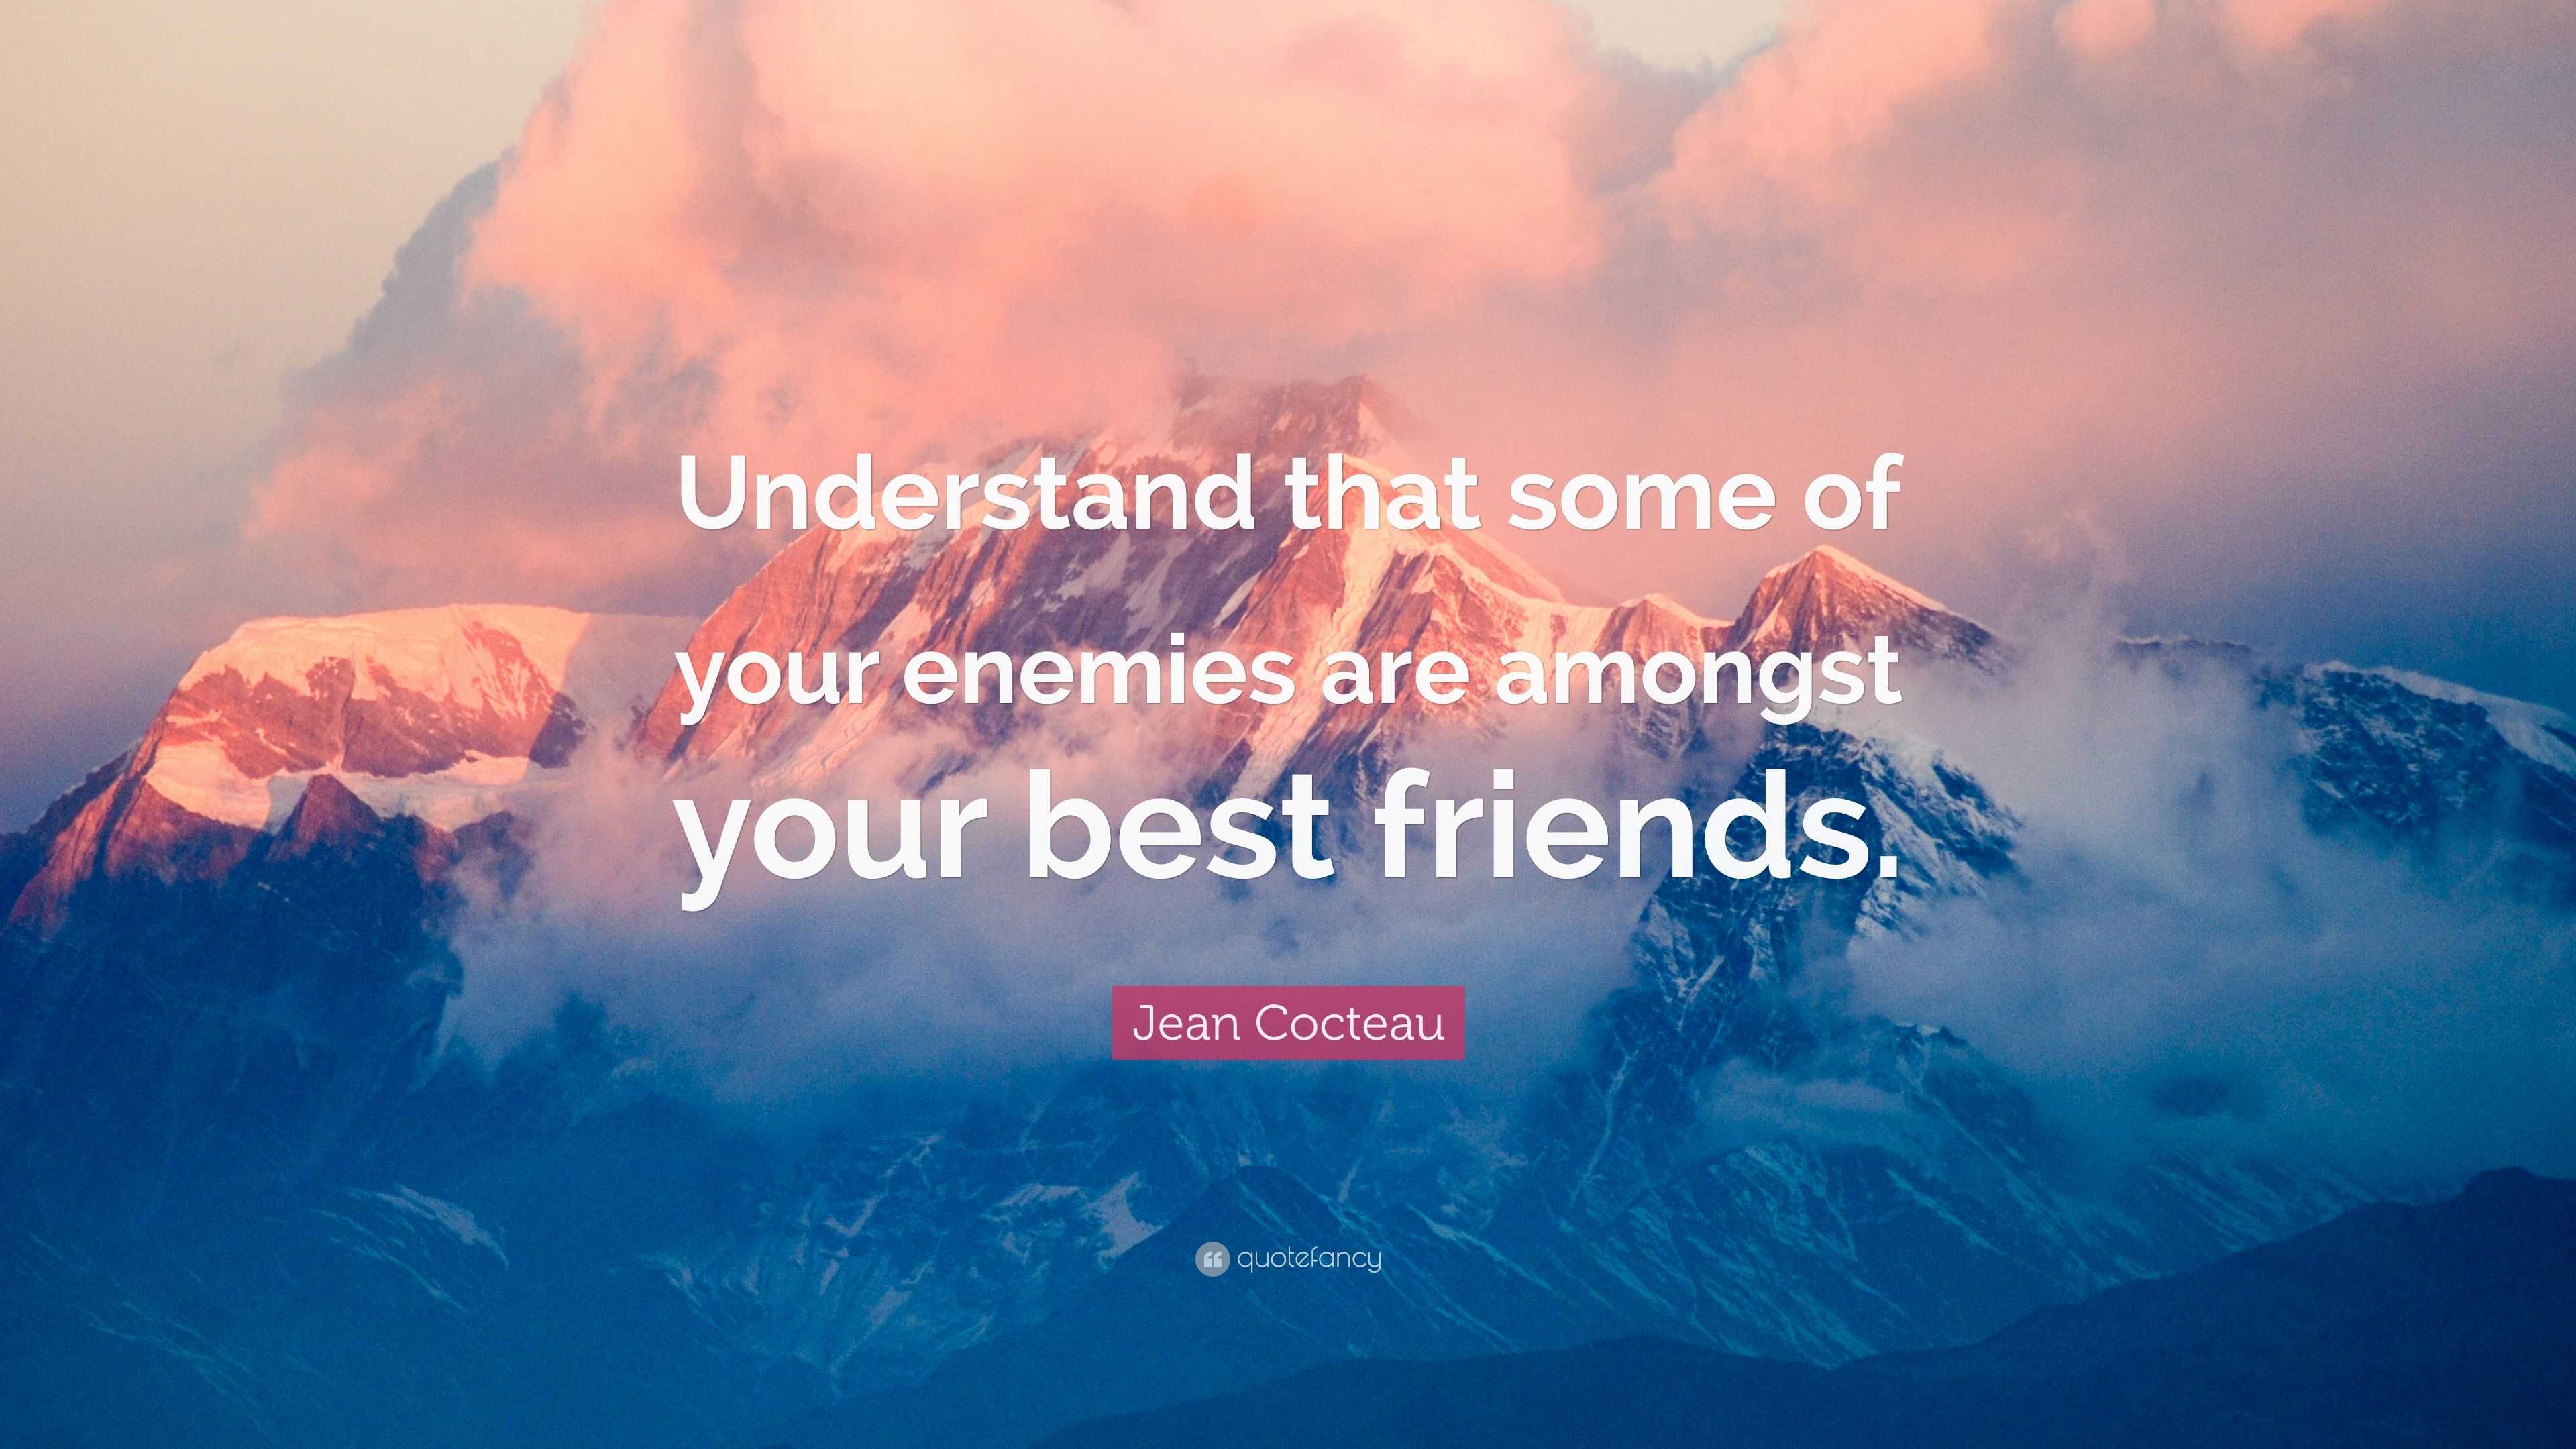 Jean Cocteau Quote: “Understand that some of your enemies are amongst ...